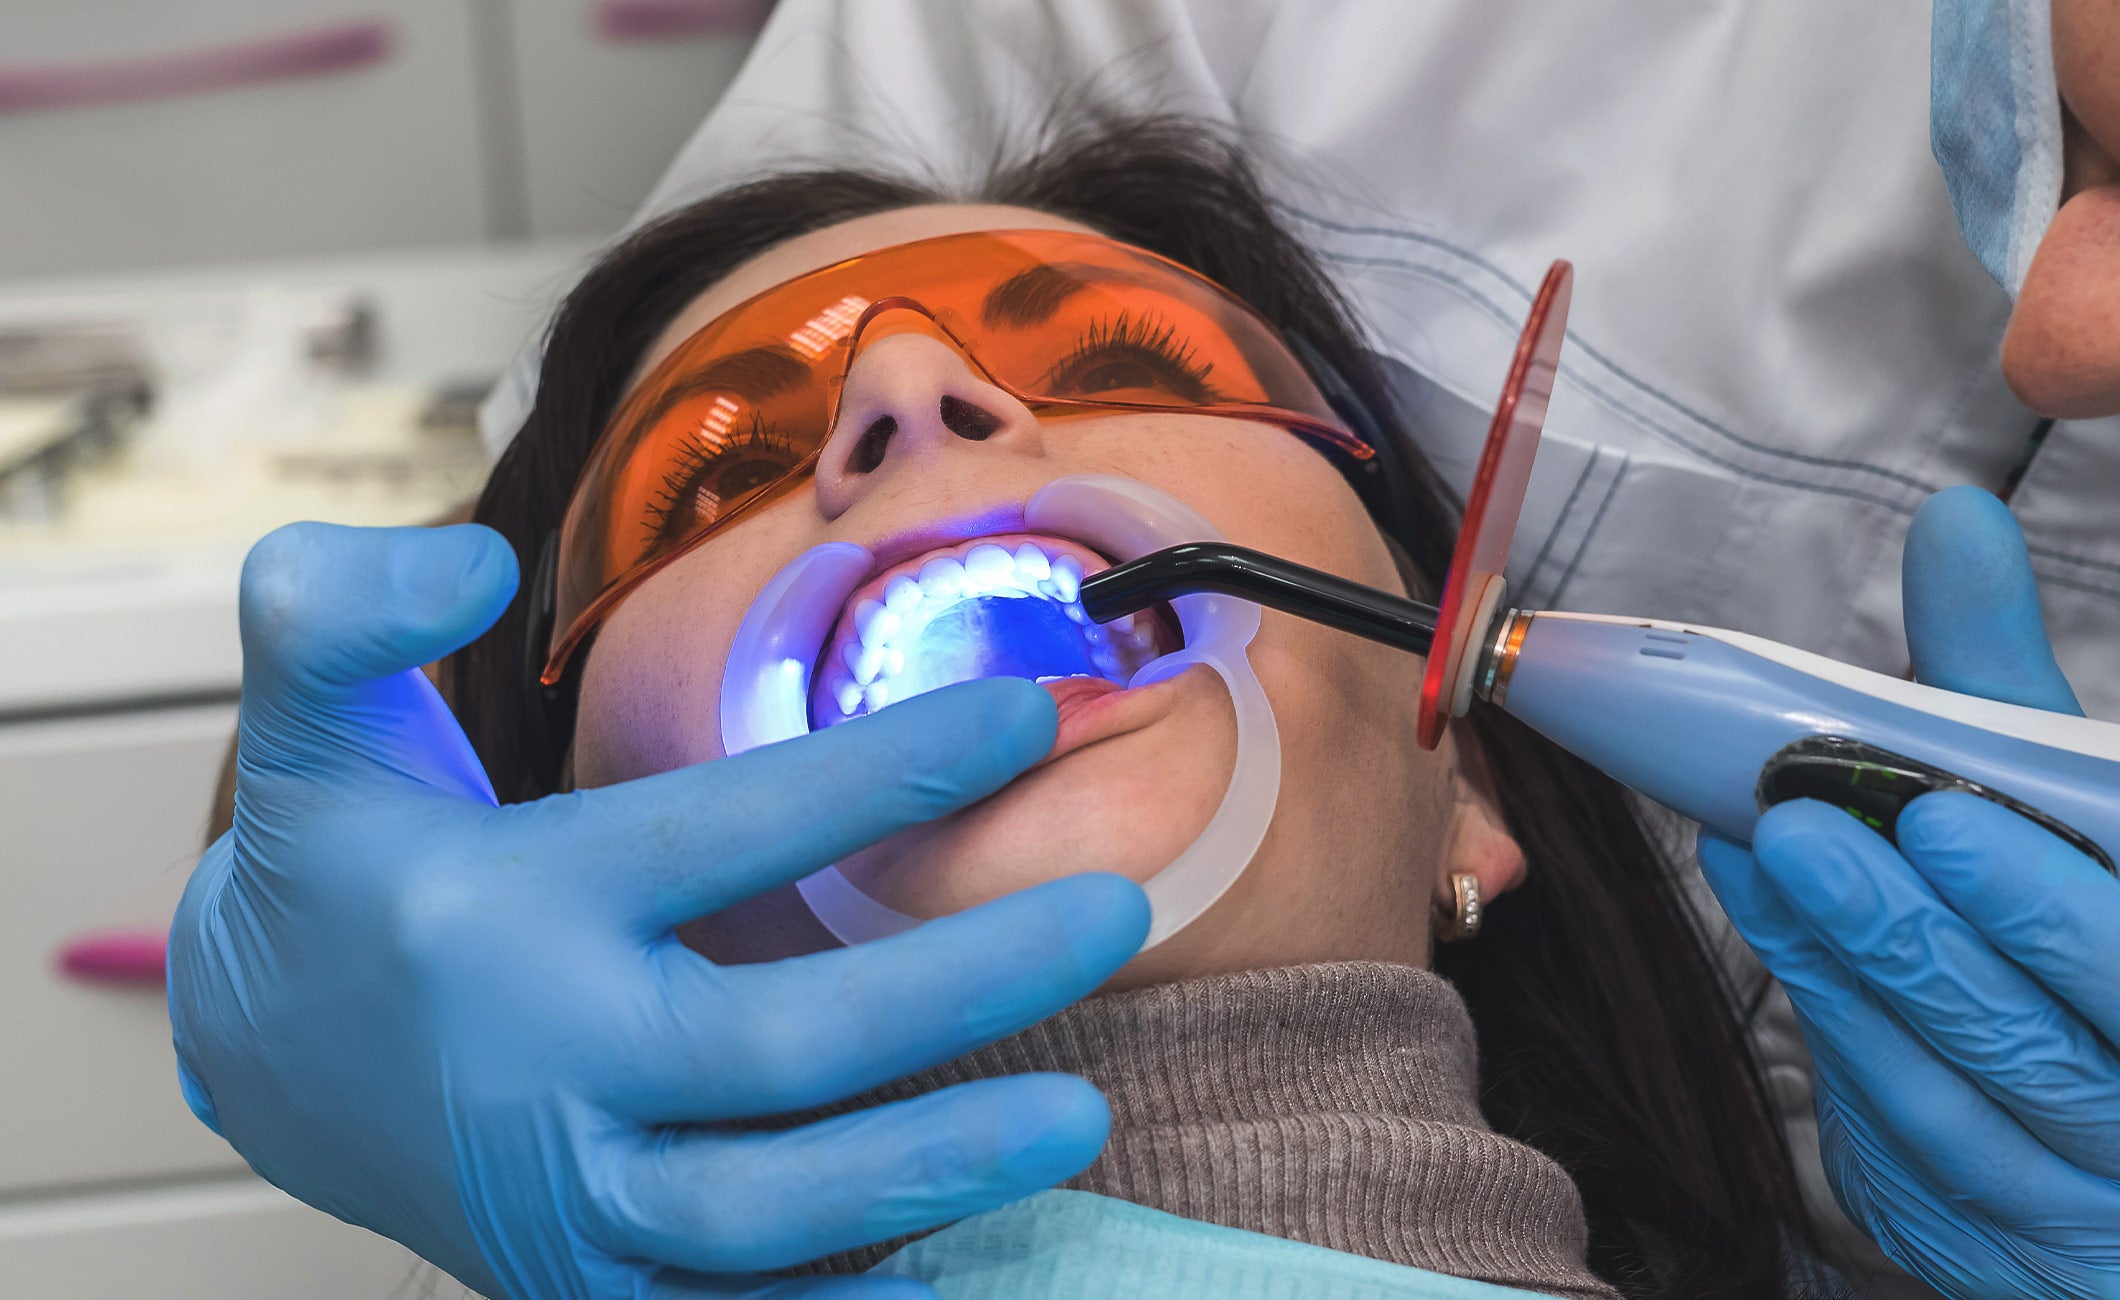 laser teeth whitening being done on a woman 